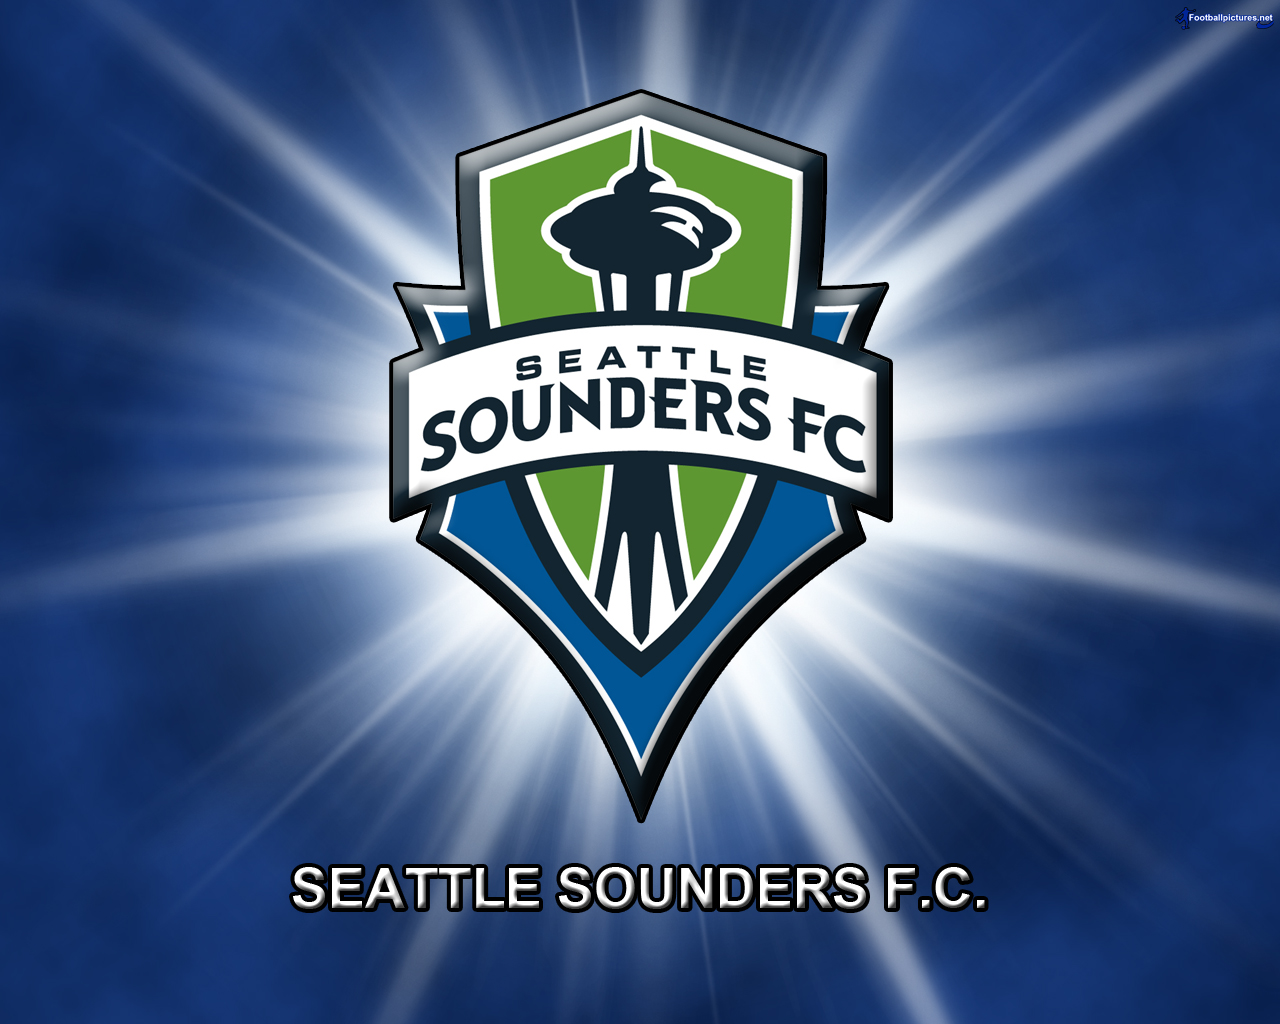 seattle sounders fc 2012 1280x1024 wallpaper, Football Pictures ...